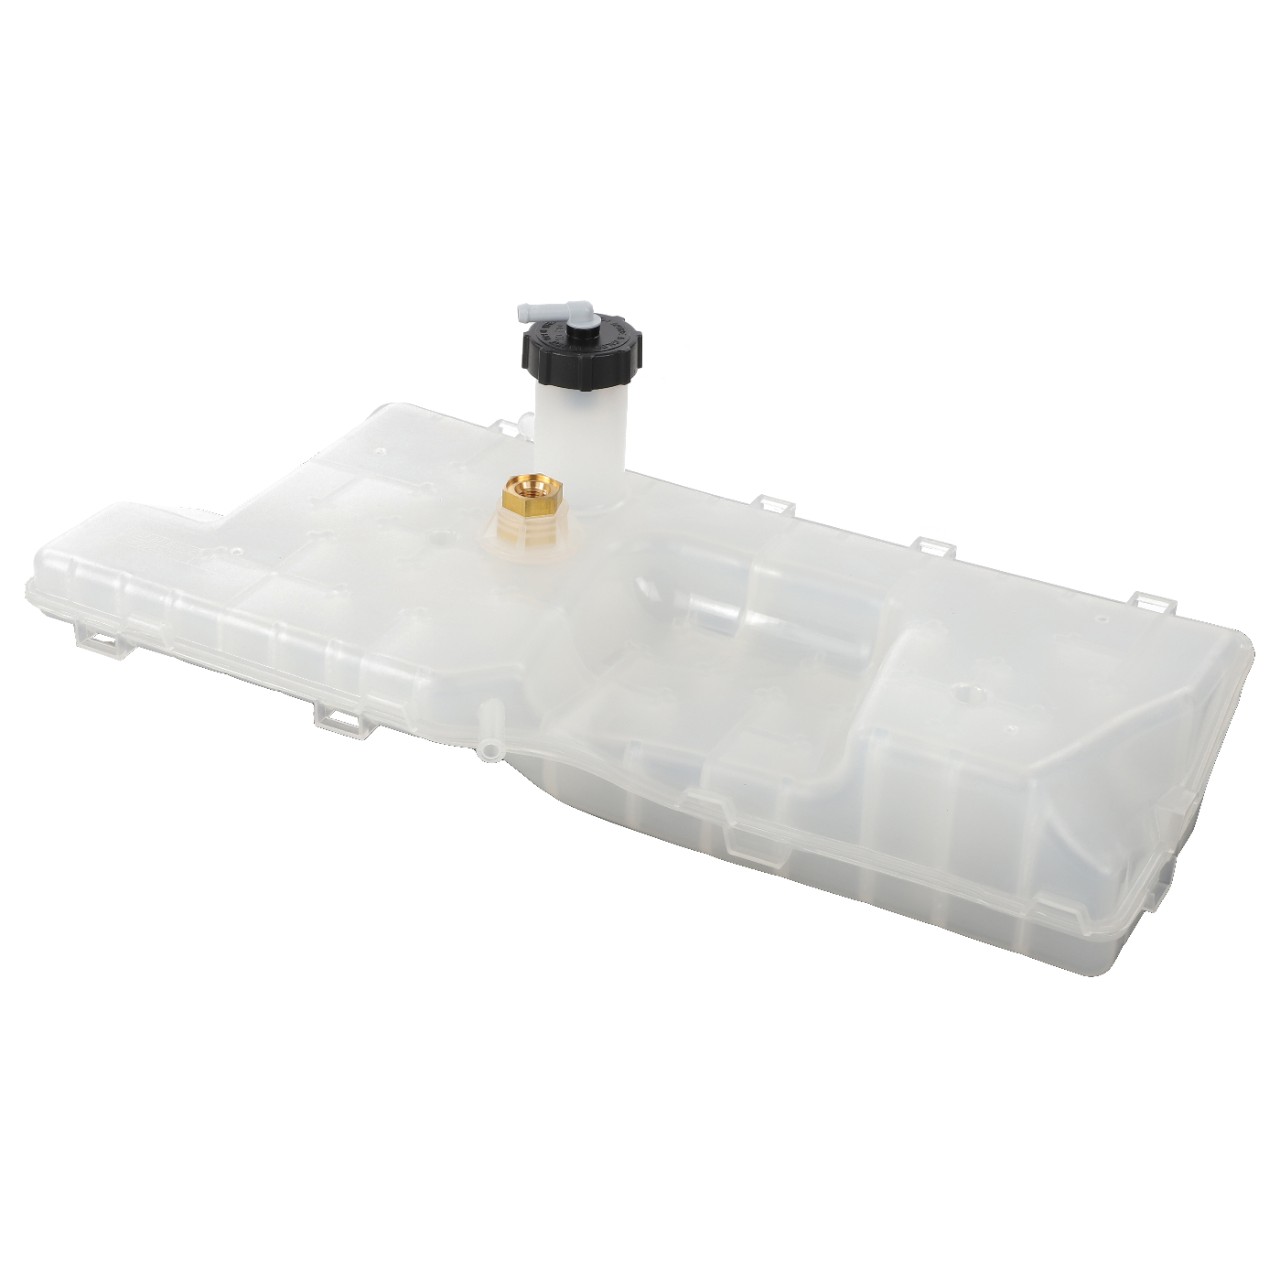 Expansion Tank, Threaded Cap (cap included)